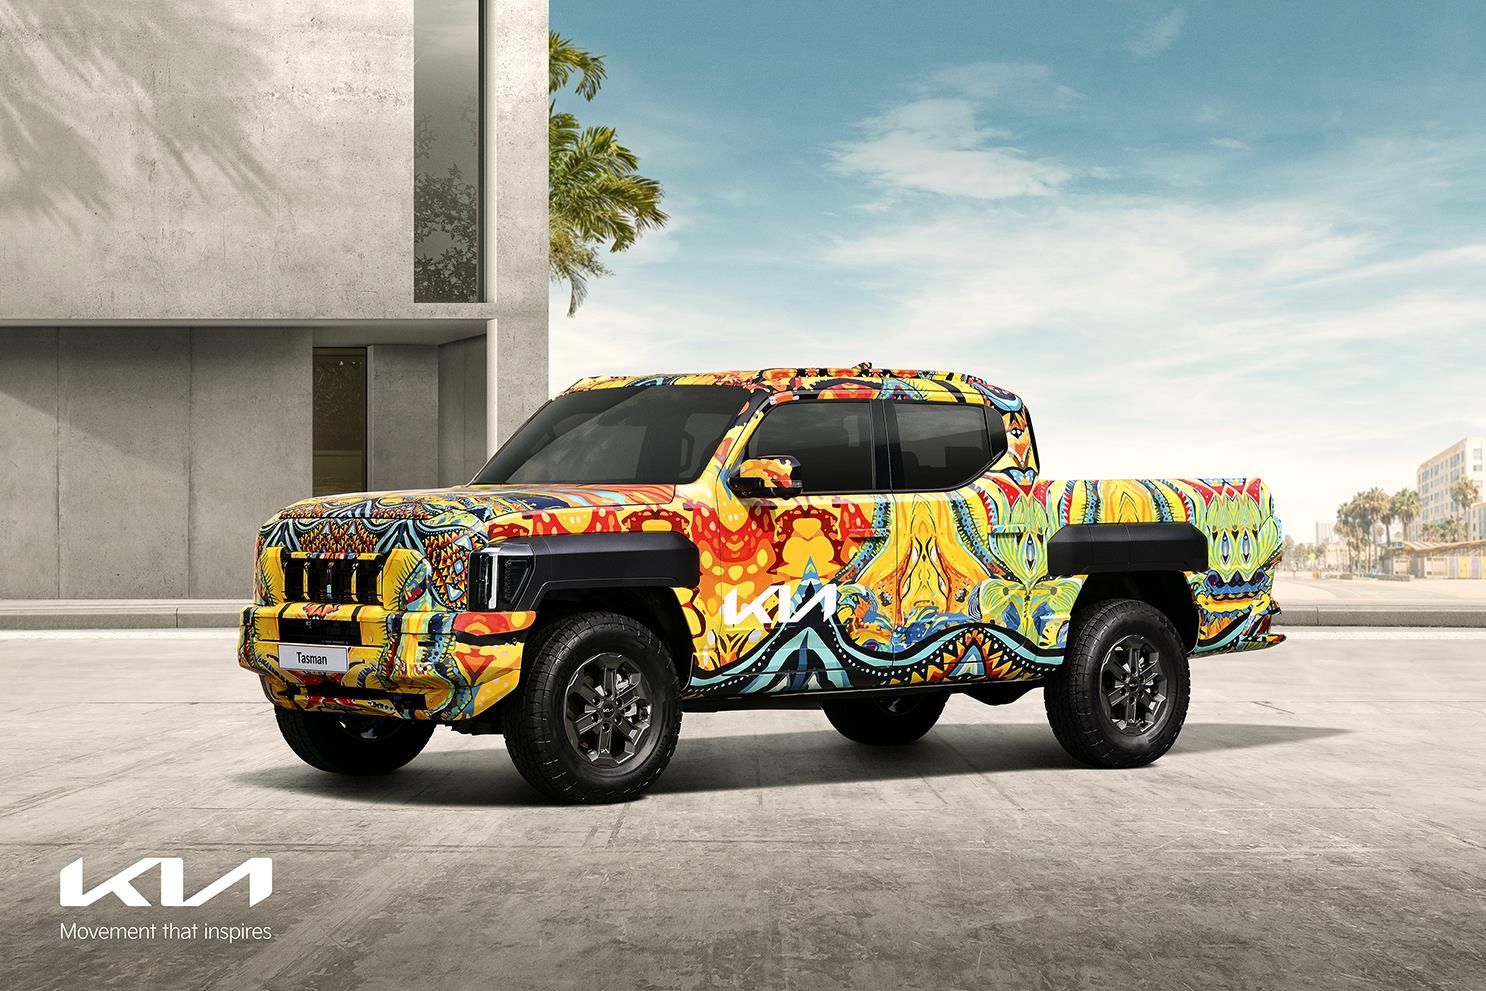 Kia Unveils Artistic Camouflage for its First Pickup, the Tasman